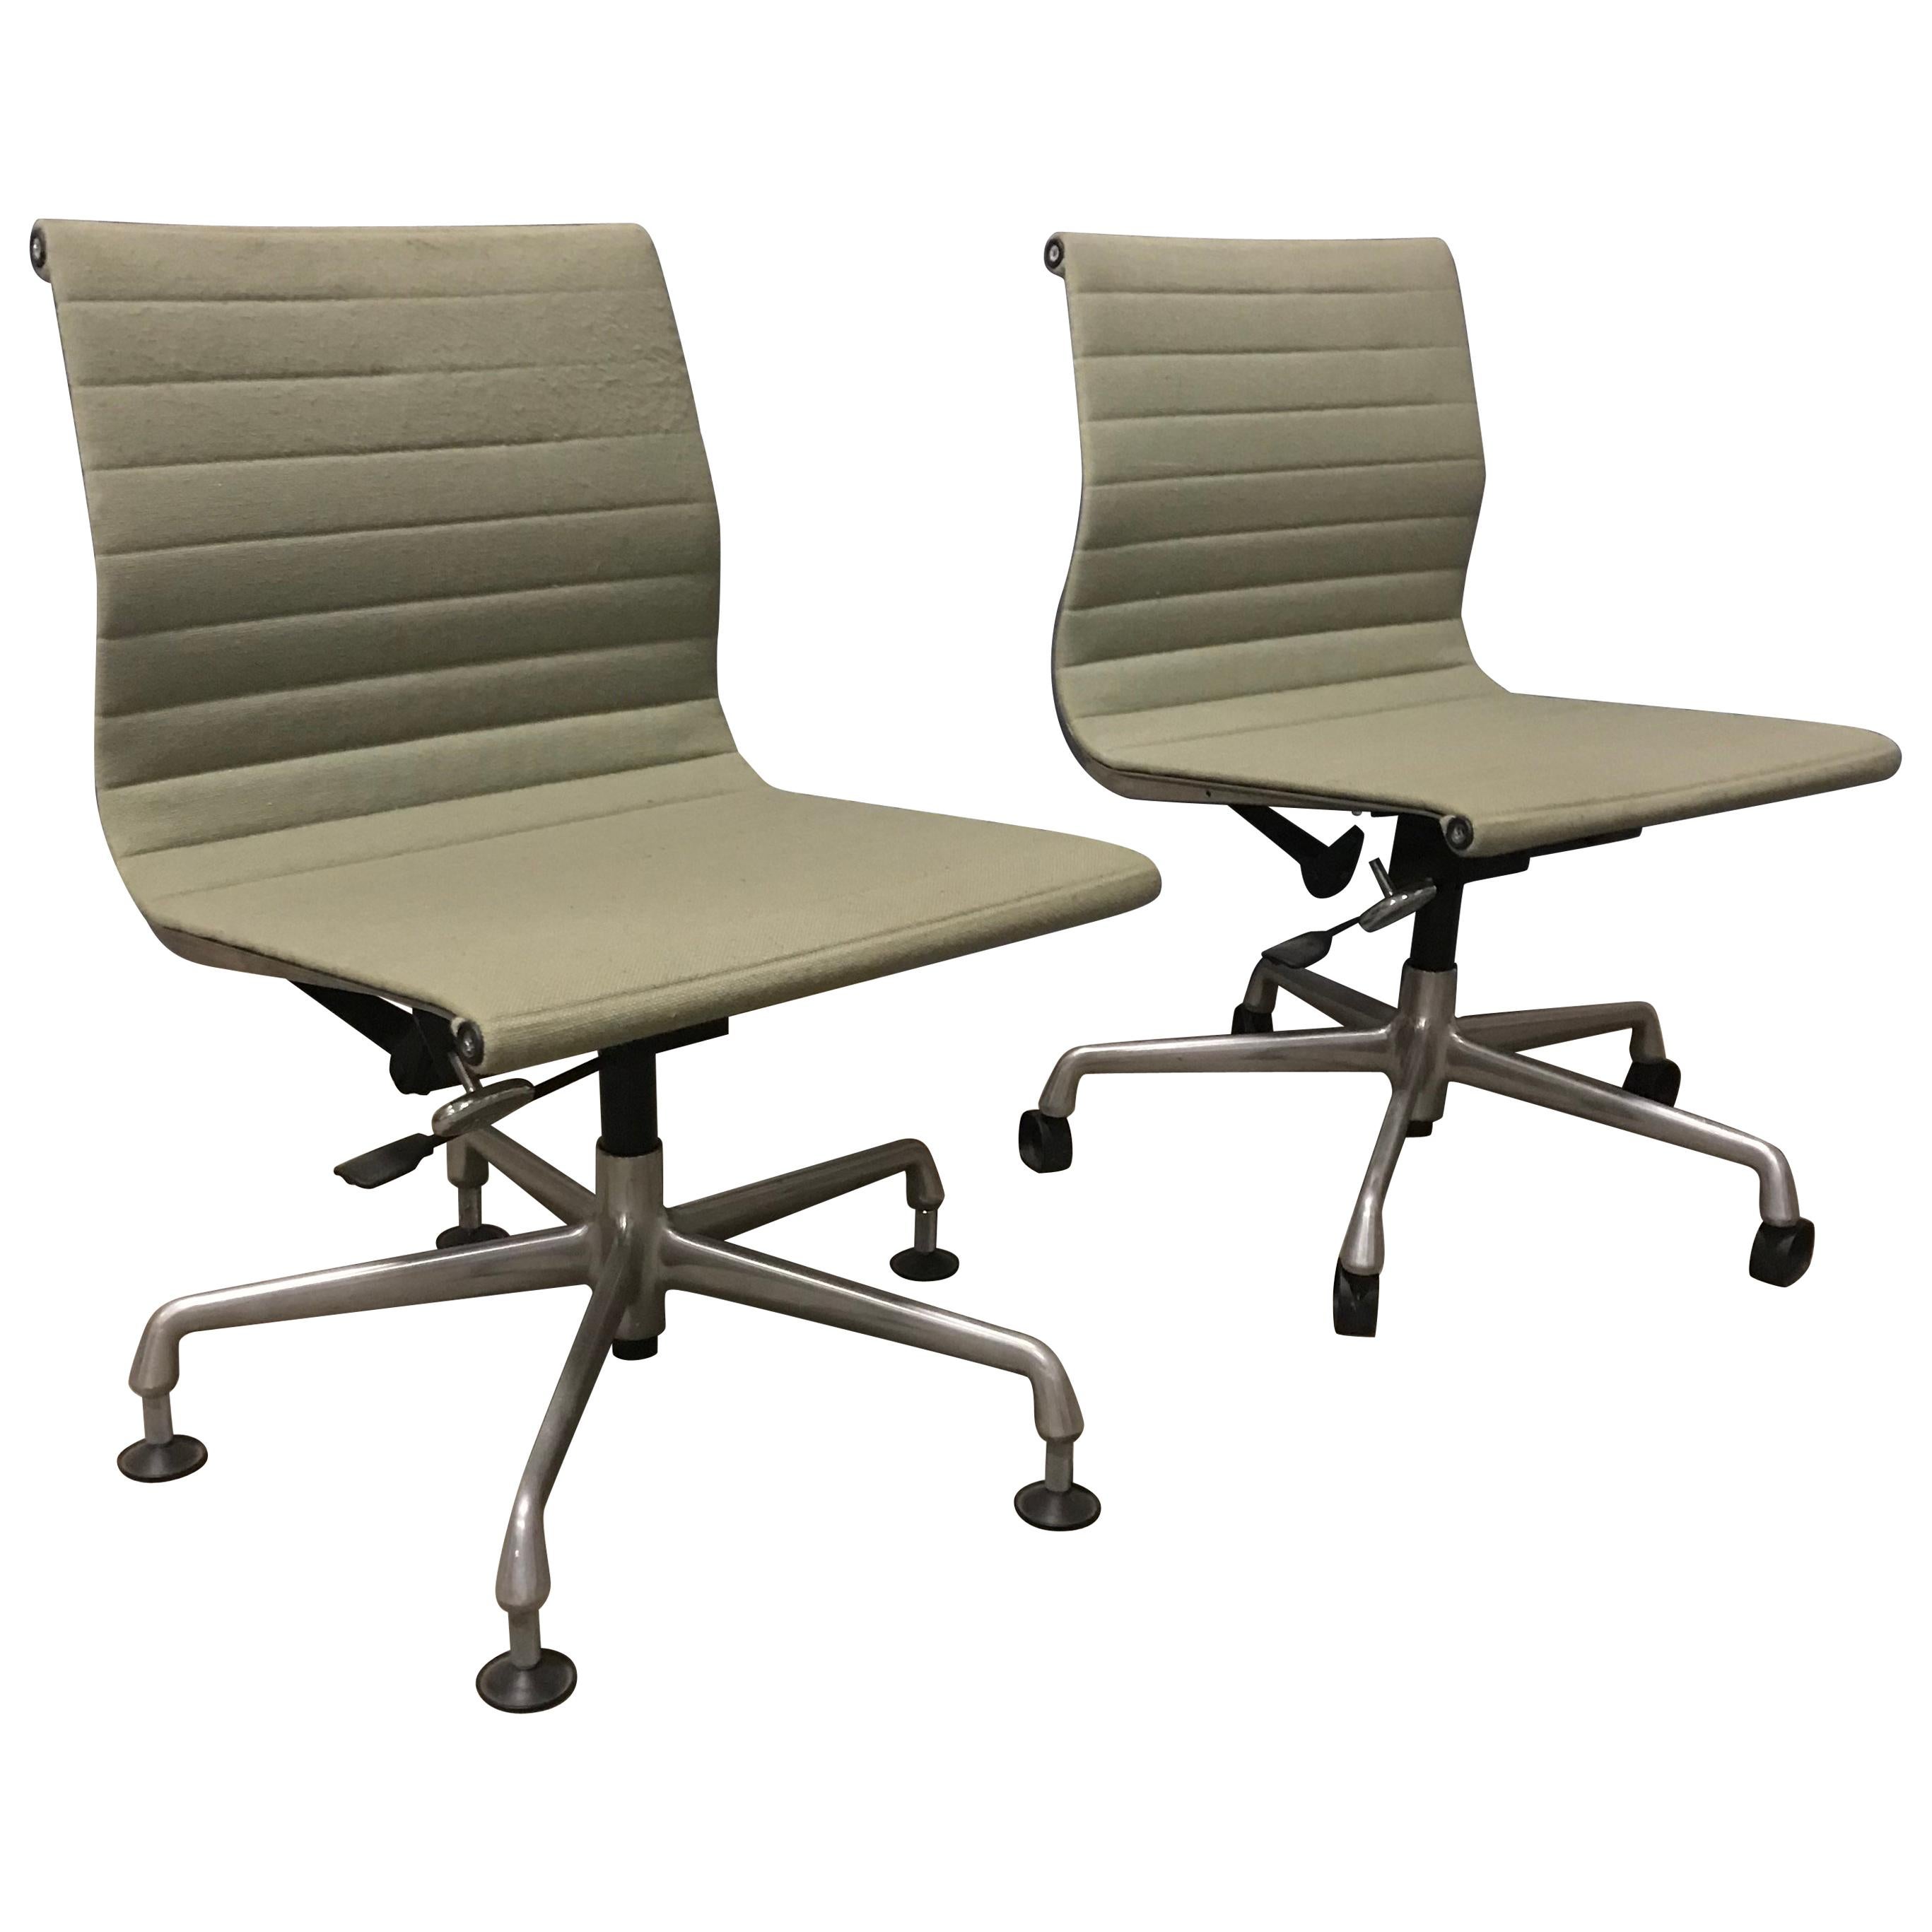 1958 Ray and Charles Eames, Fabric, Adjust, Tilt 2 Office Chair 4 Wheels No Arms